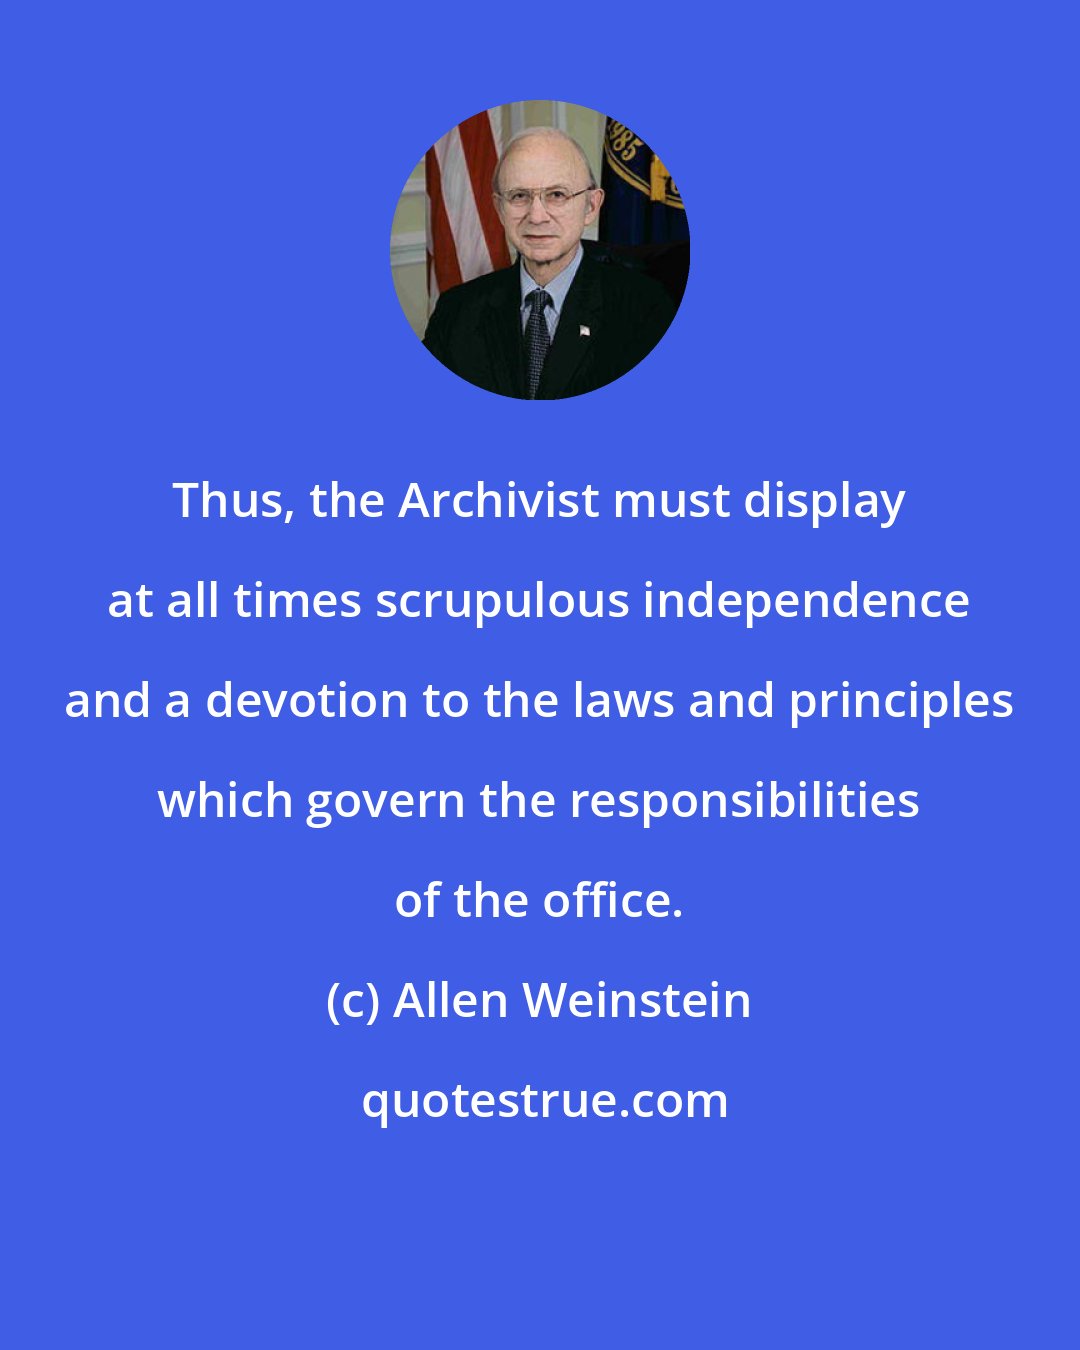 Allen Weinstein: Thus, the Archivist must display at all times scrupulous independence and a devotion to the laws and principles which govern the responsibilities of the office.